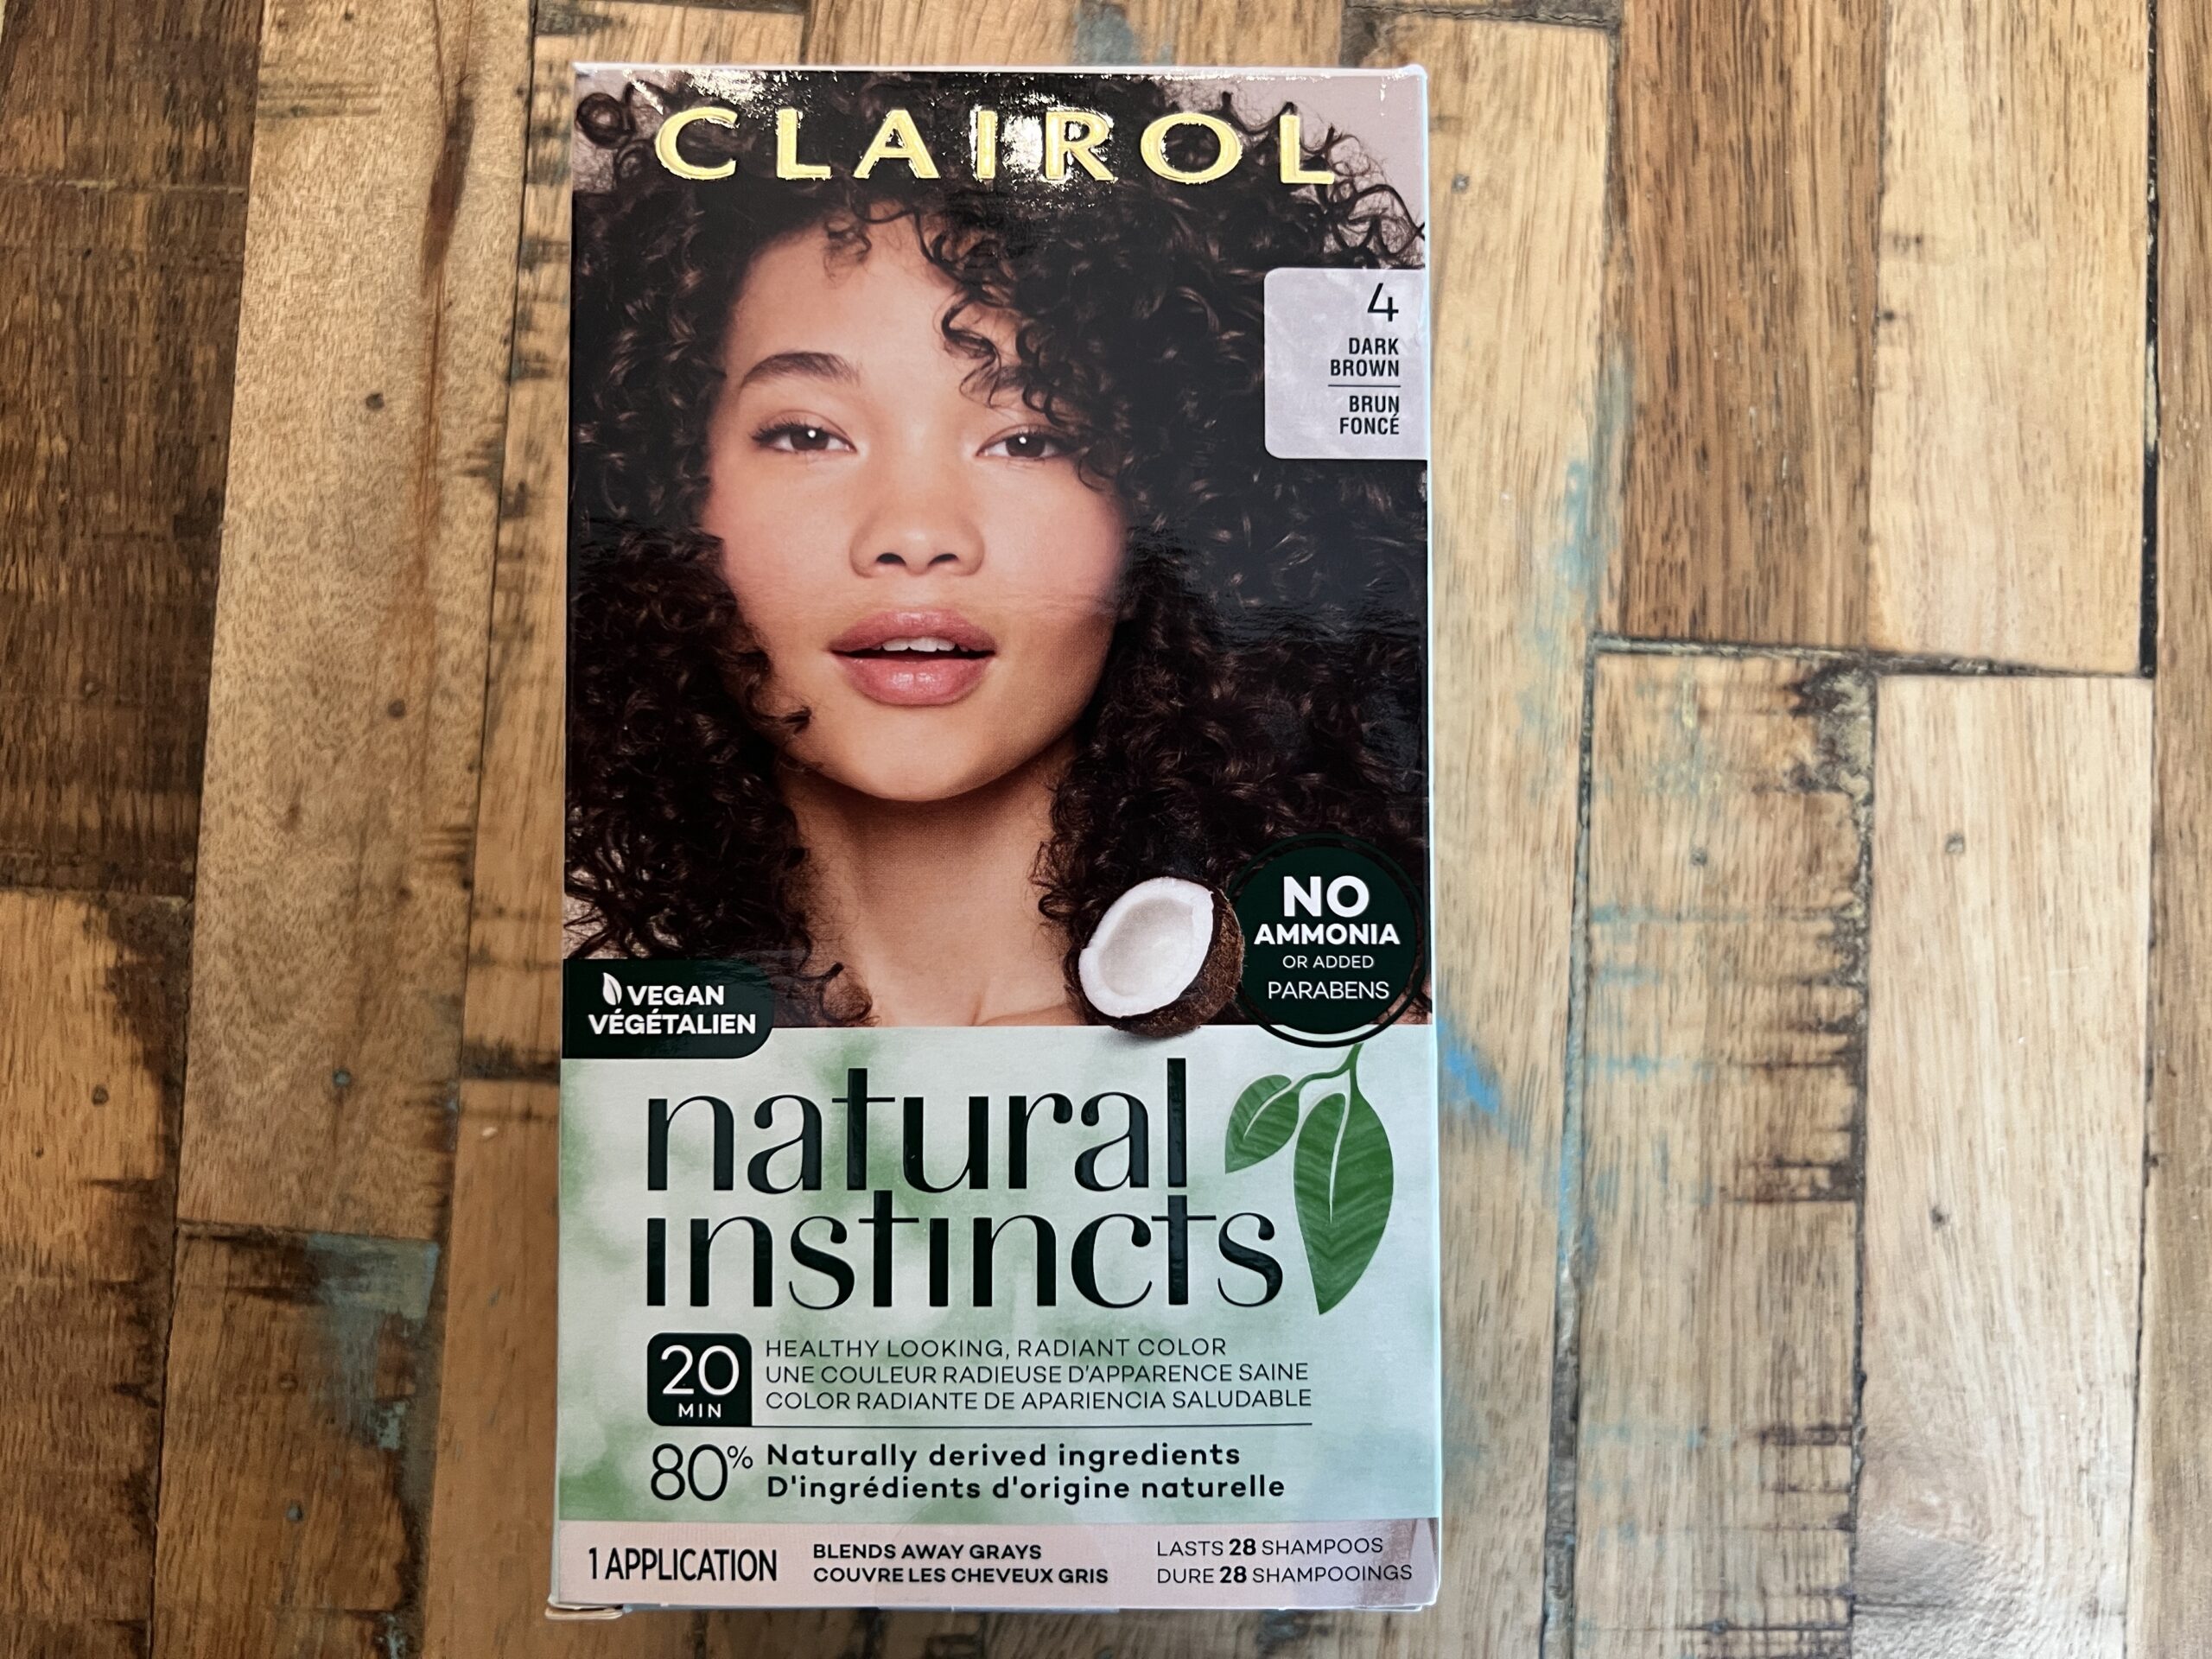 This box of ammonia and paraben-free Clairol Natural Instincts dark brown demi-permanent hair dye is vegan and includes naturally derived ingredients.